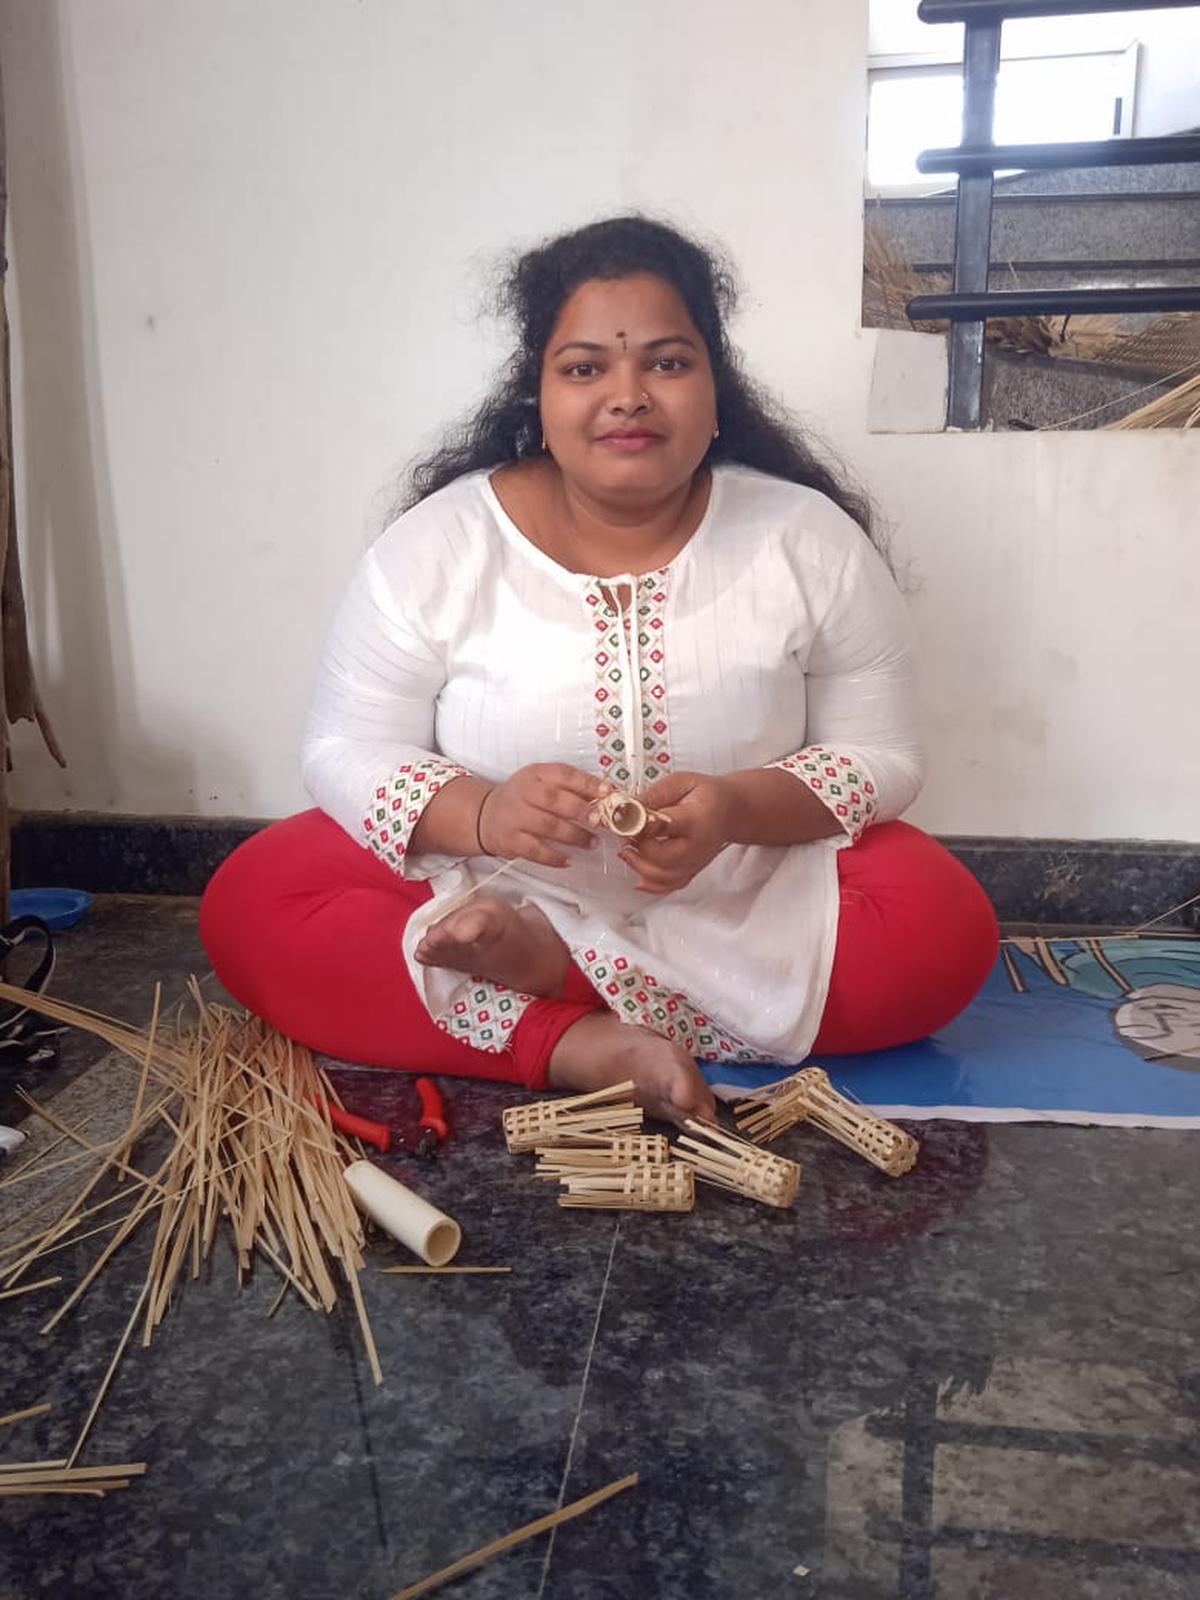 Vedambha, one of the members of the Karnataka-based Mahila Swasahaya Mutual Benefit Trust, a women’s collective making bamboo products, is happy that she has a regular income.